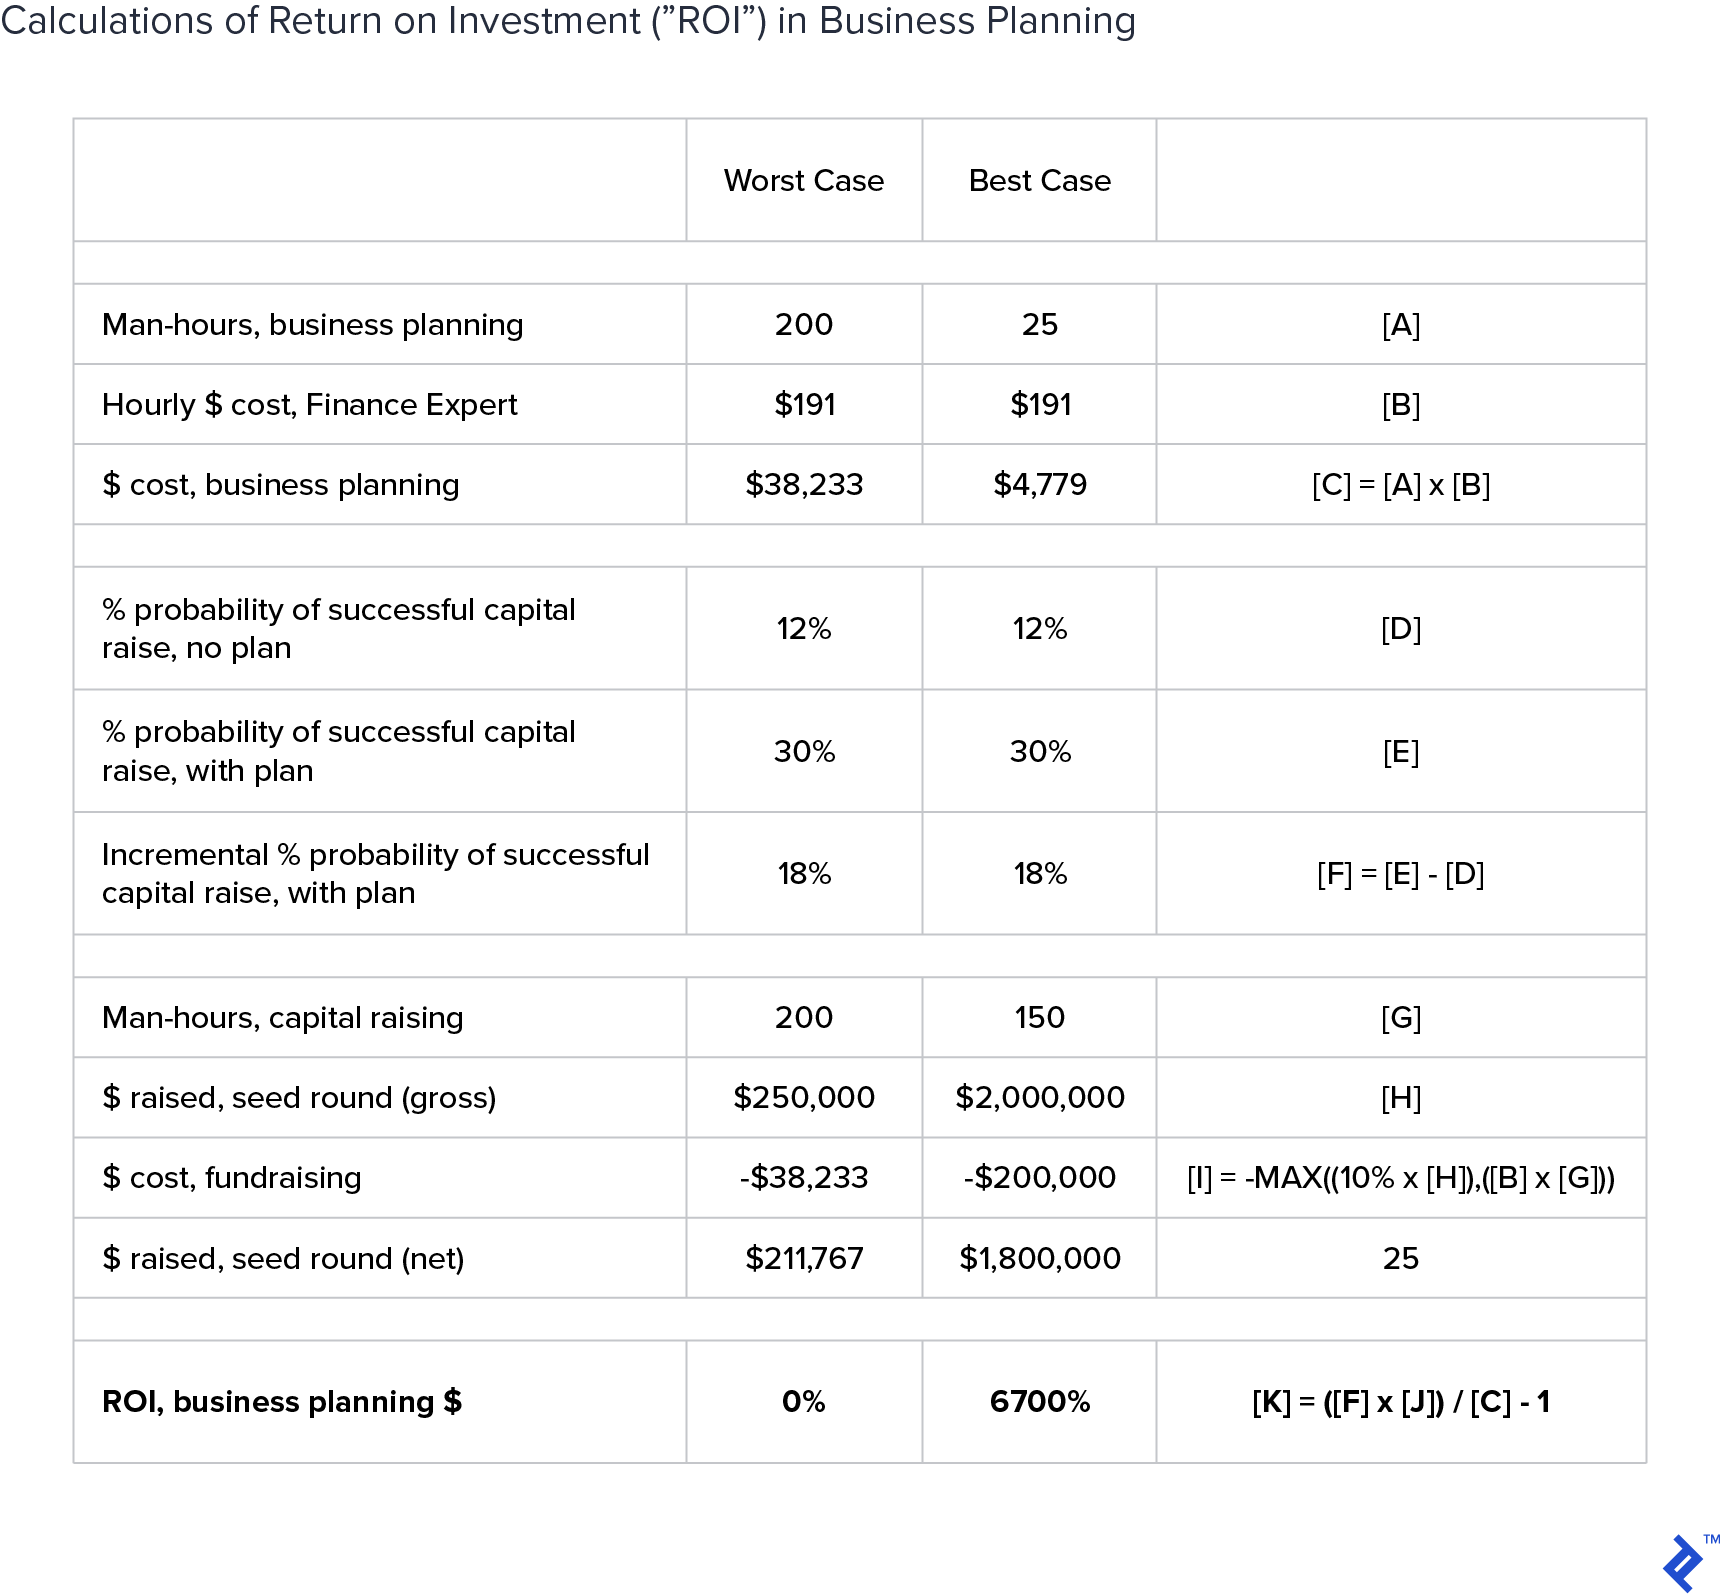 A table showing calculations on return of investment in business planning